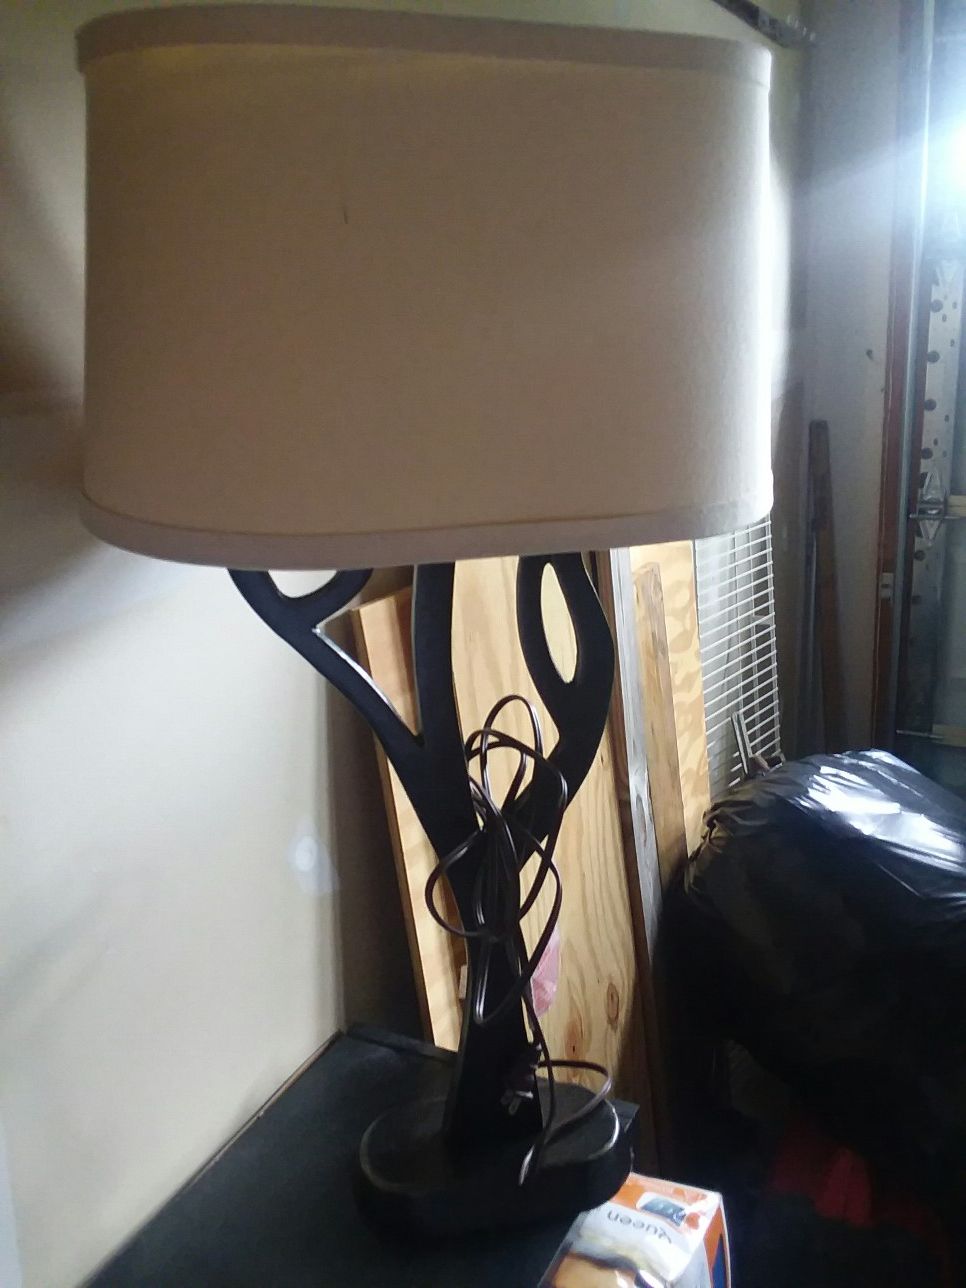 Is a good lamp very nice in perfect condition almost new